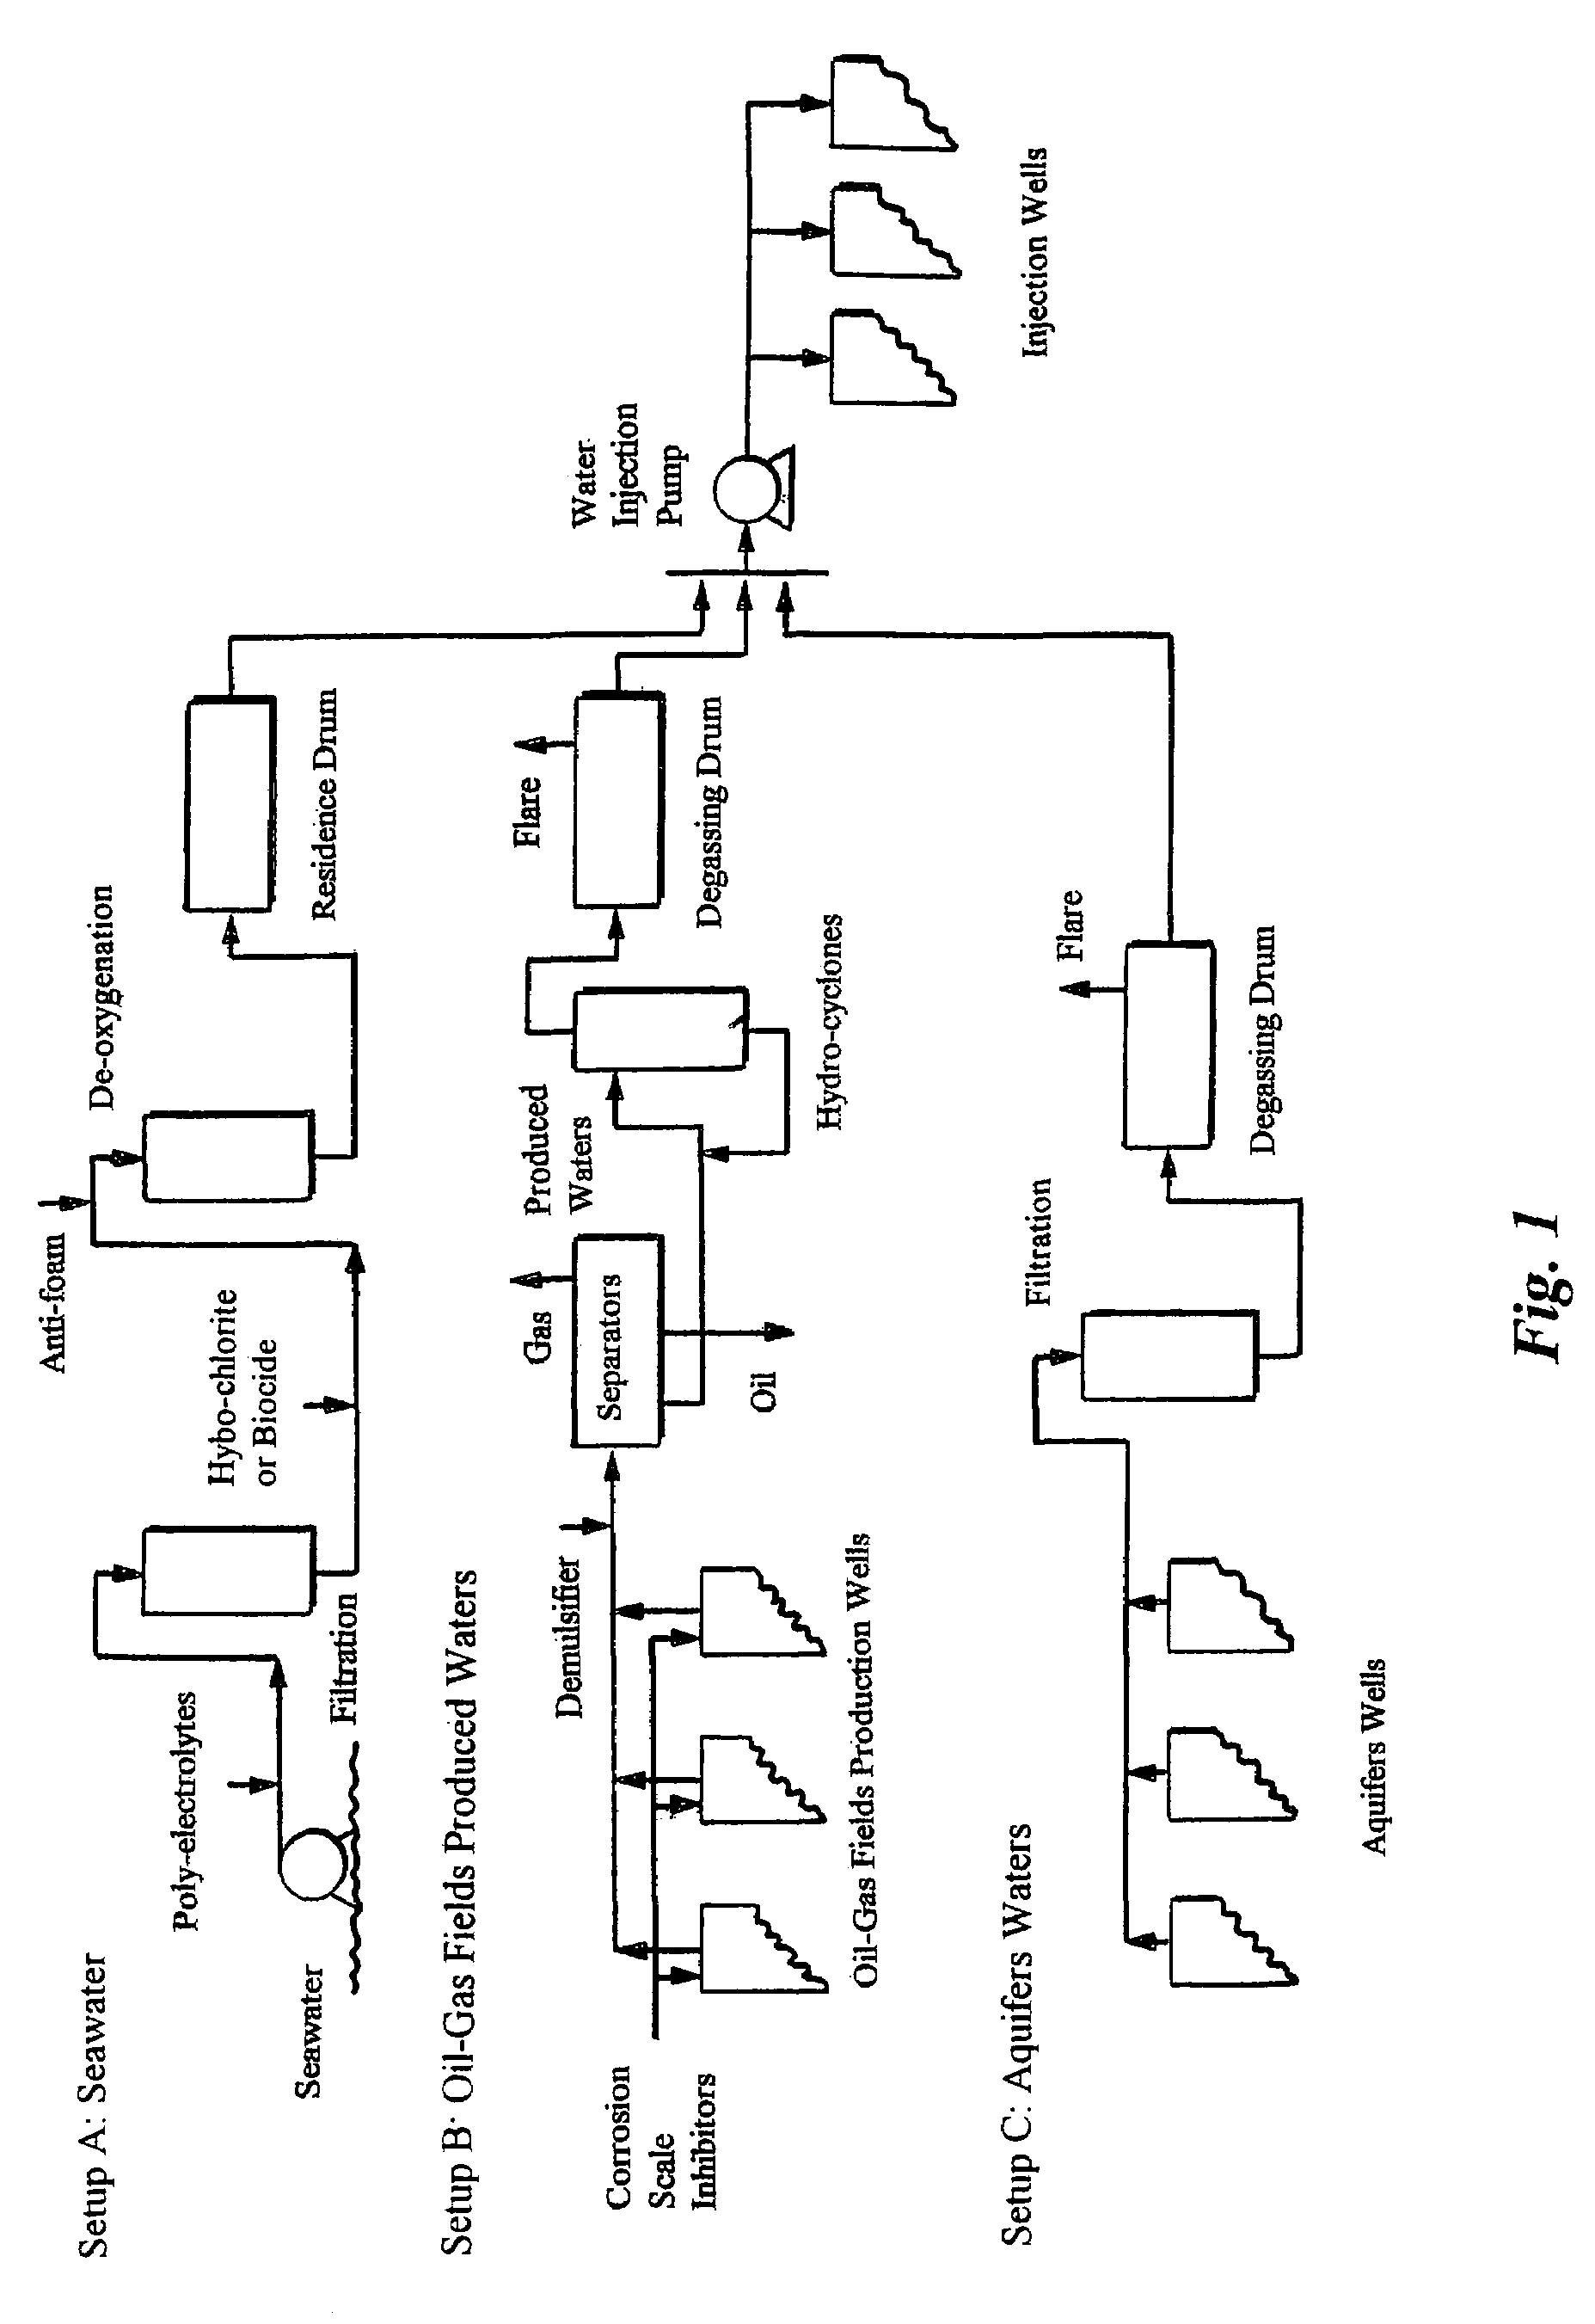 Methods to solve alkaline-sulfate scales and related-gases problems